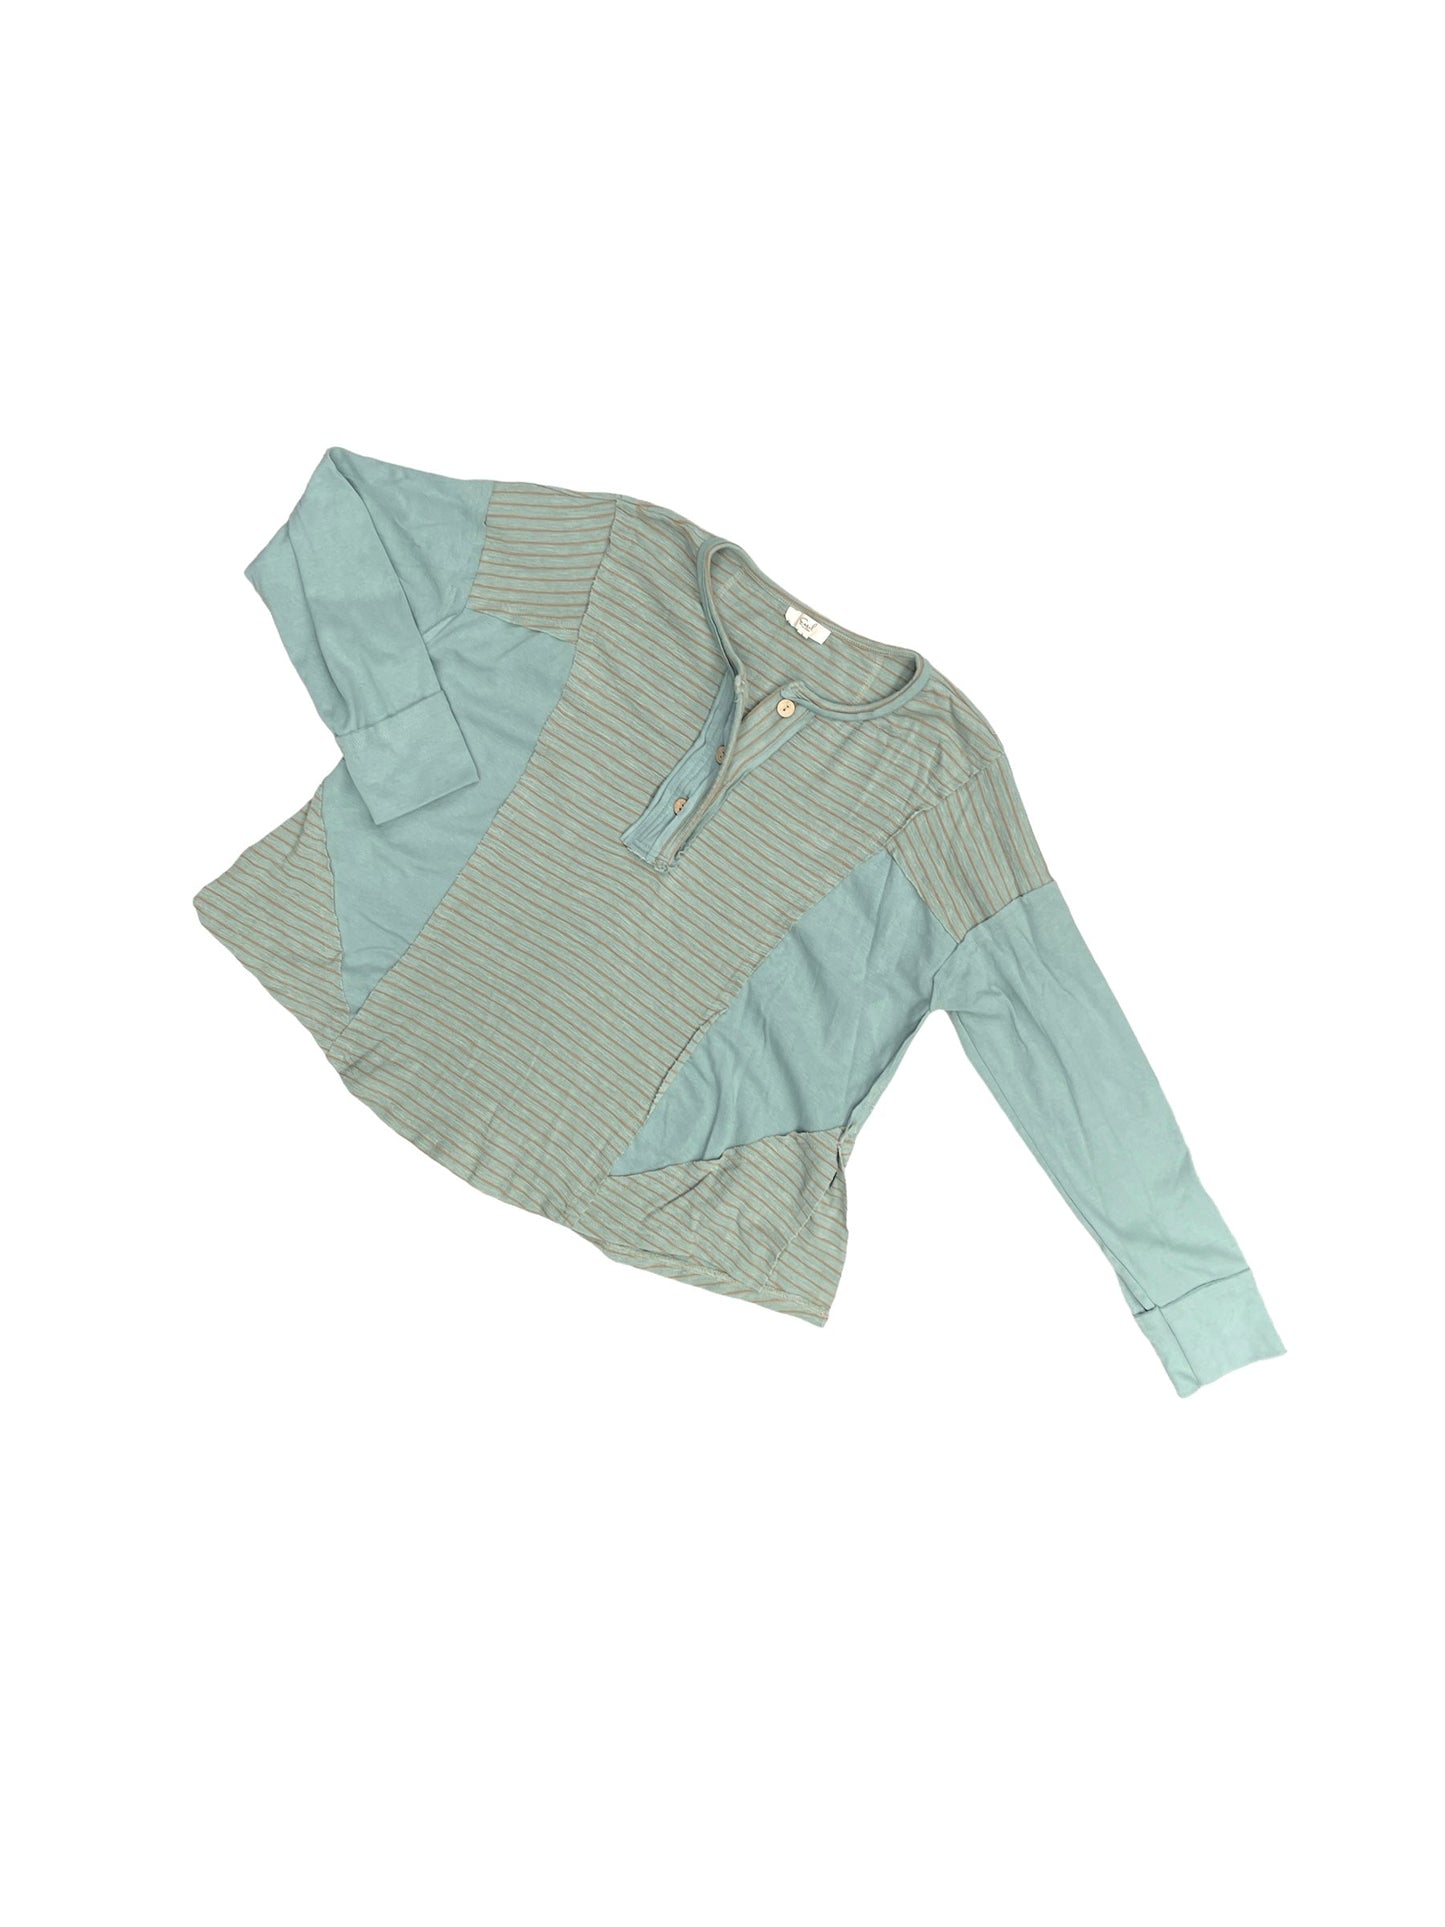 Green Top Long Sleeve Easel, Size S